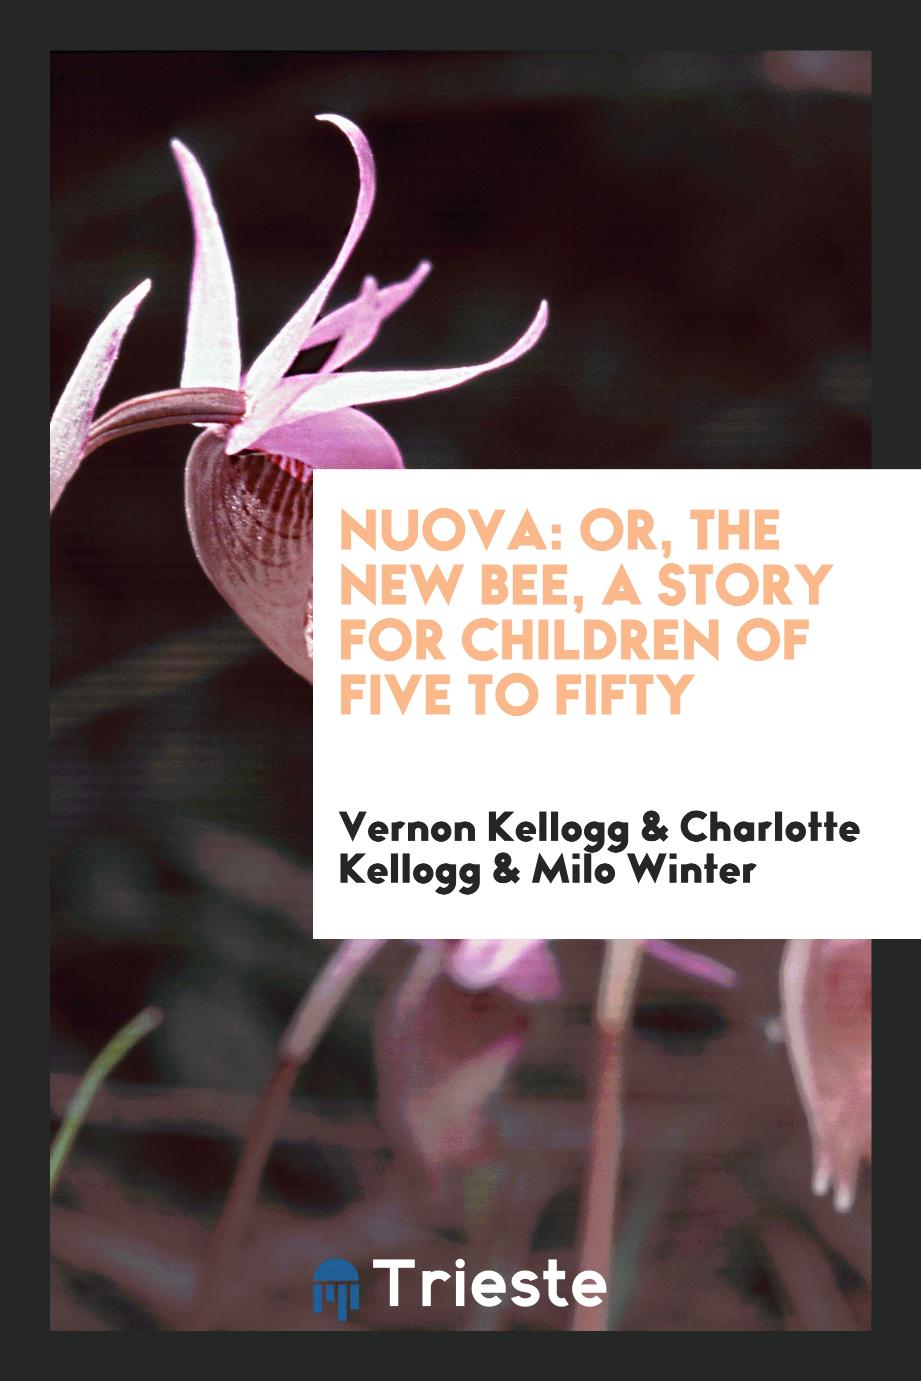 Nuova: or, The new bee, a story for children of five to fifty